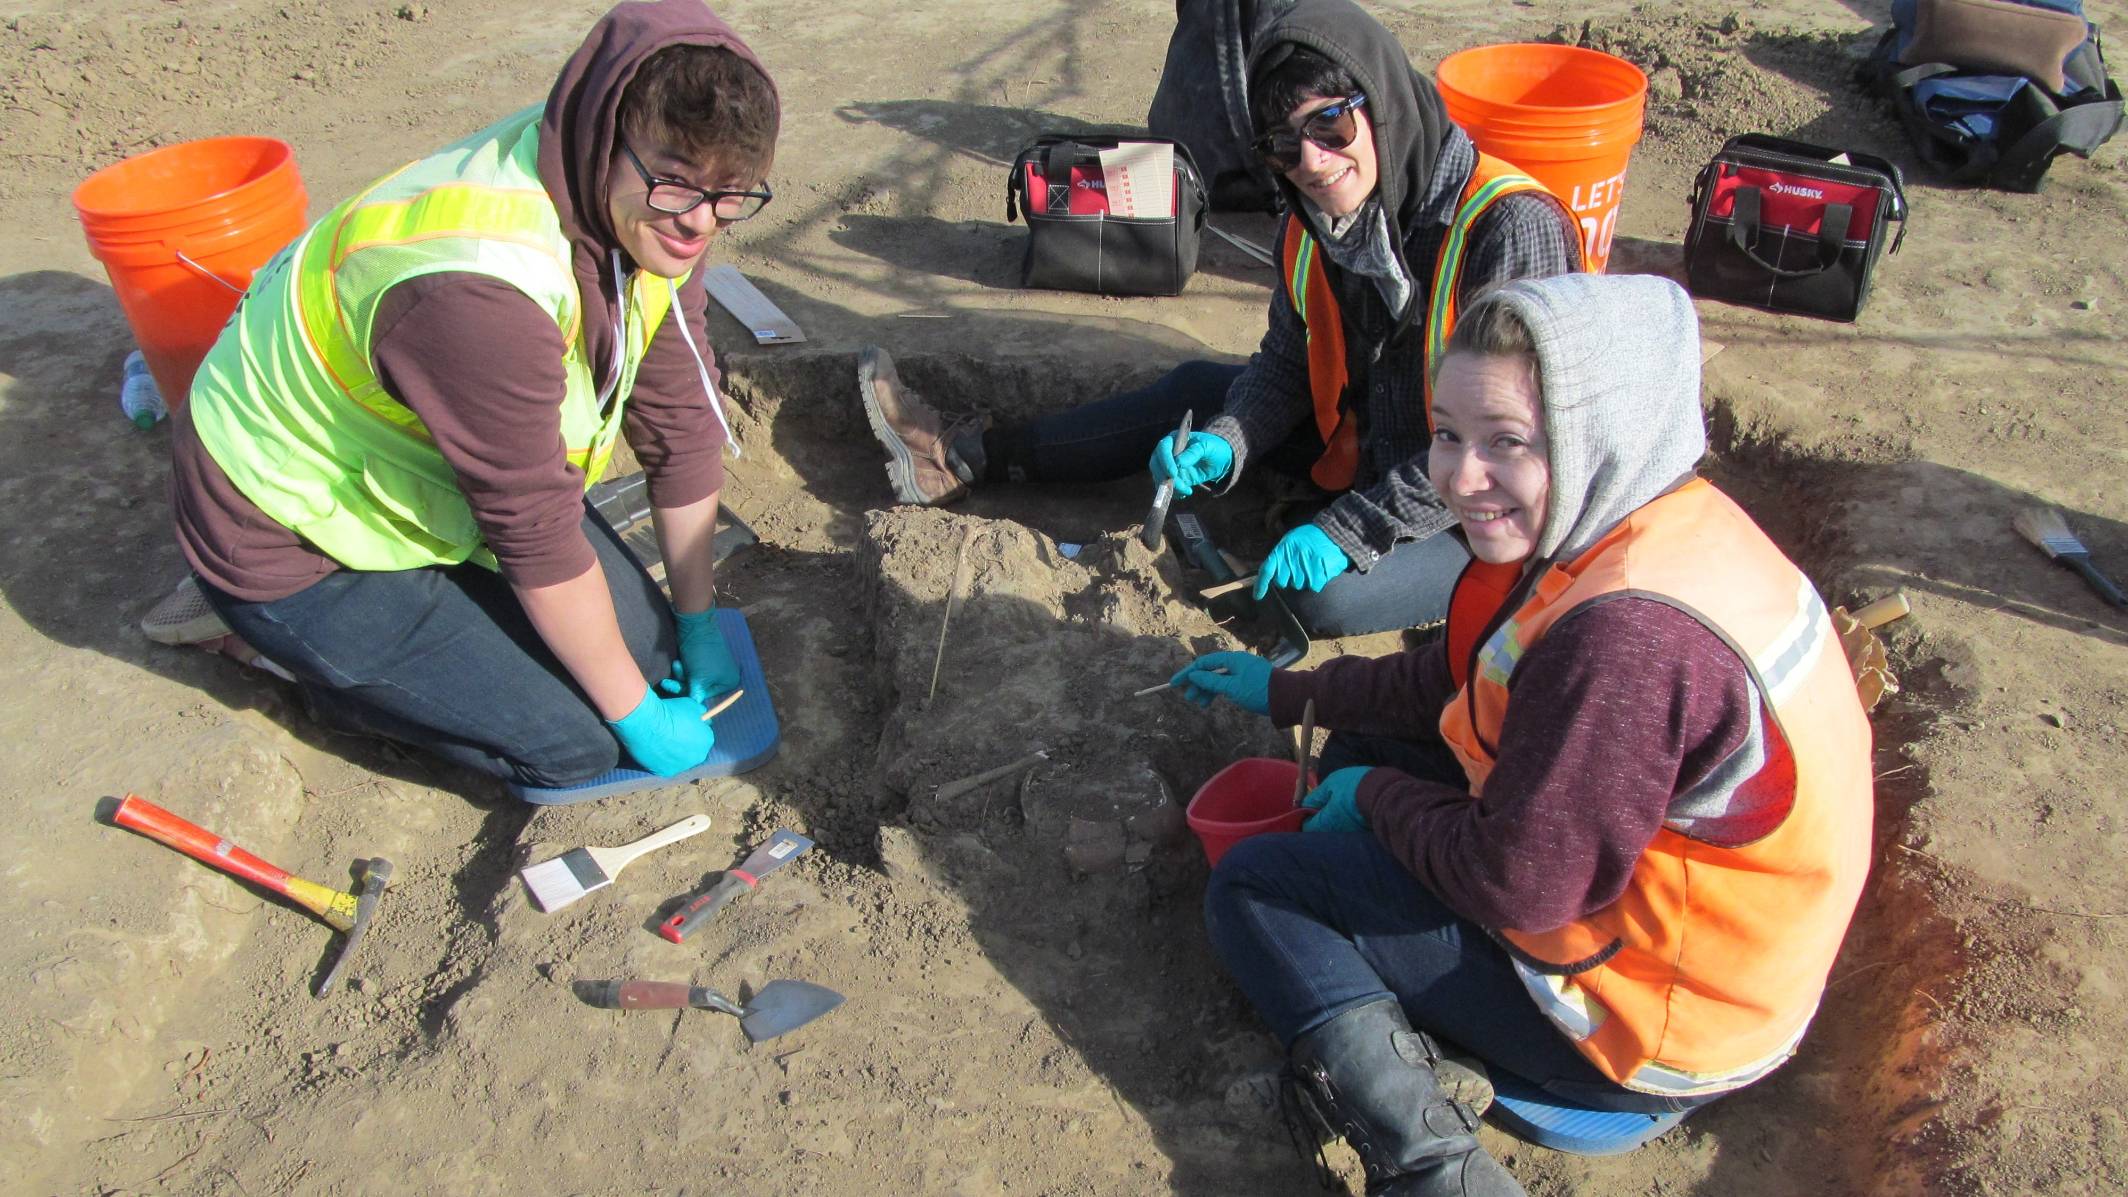 Three anthropolgy students working on a dig